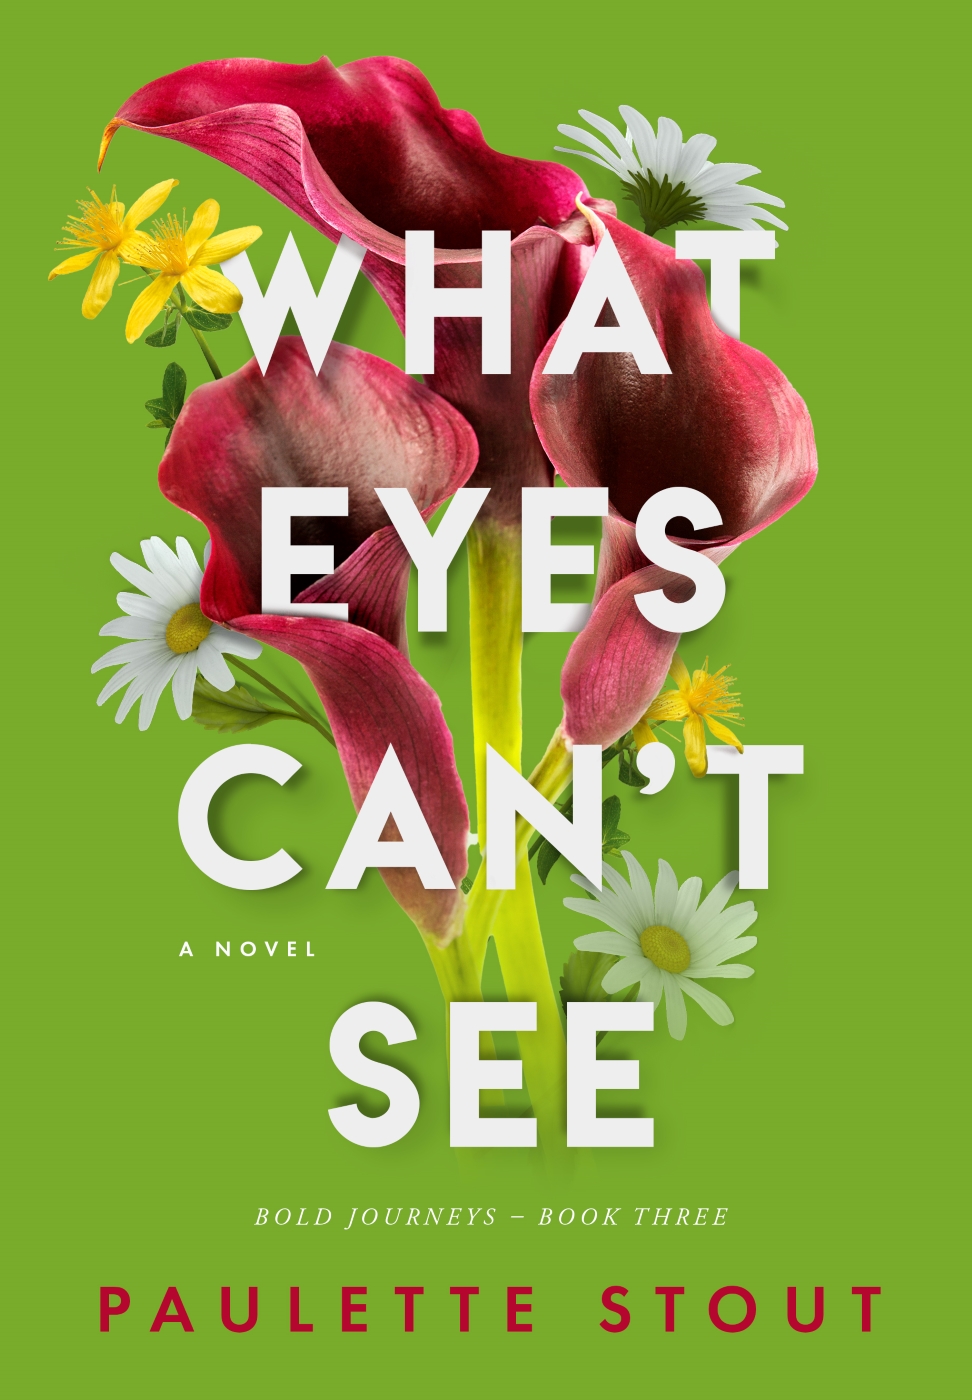 What Eyes Can’t See by Paulette Stout